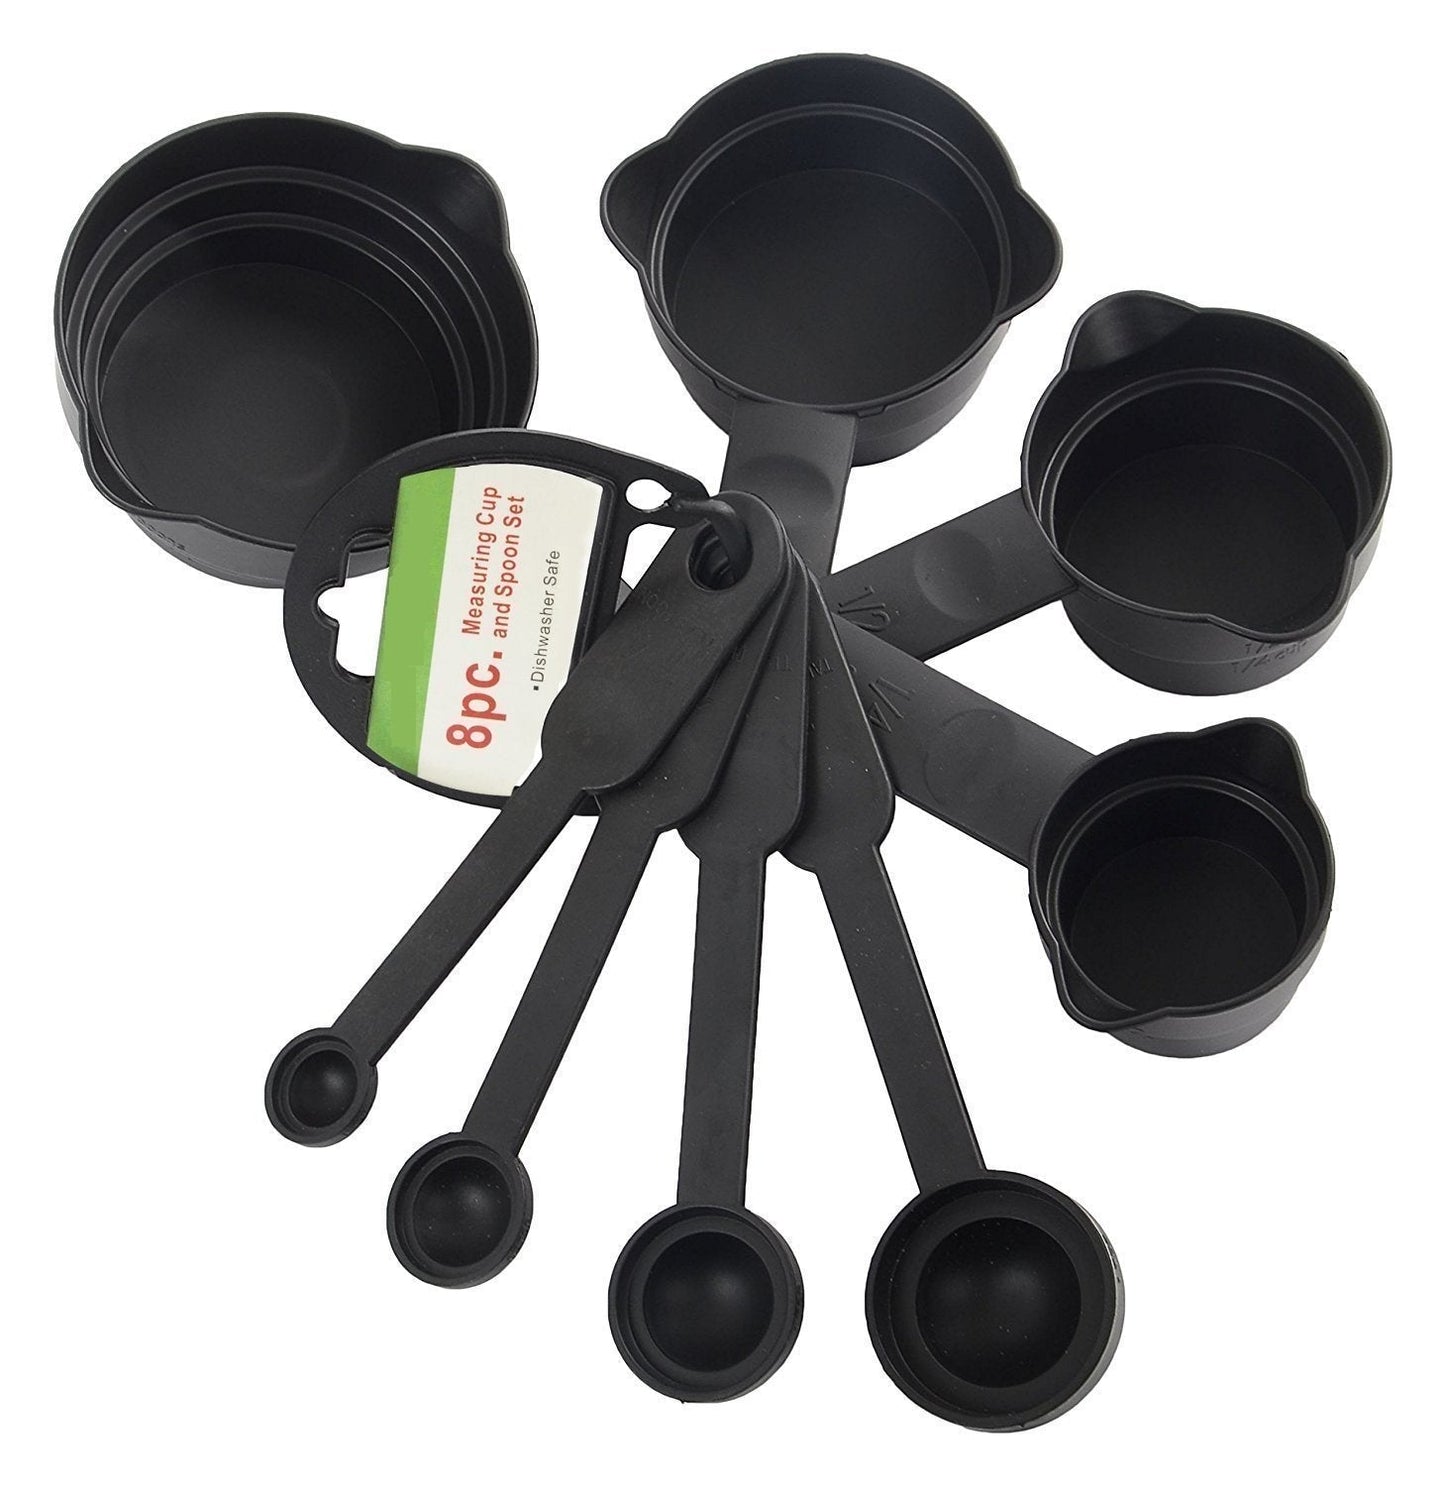 106 Plastic Measuring Cups and Spoons (8 Pcs, Black) Your Brand